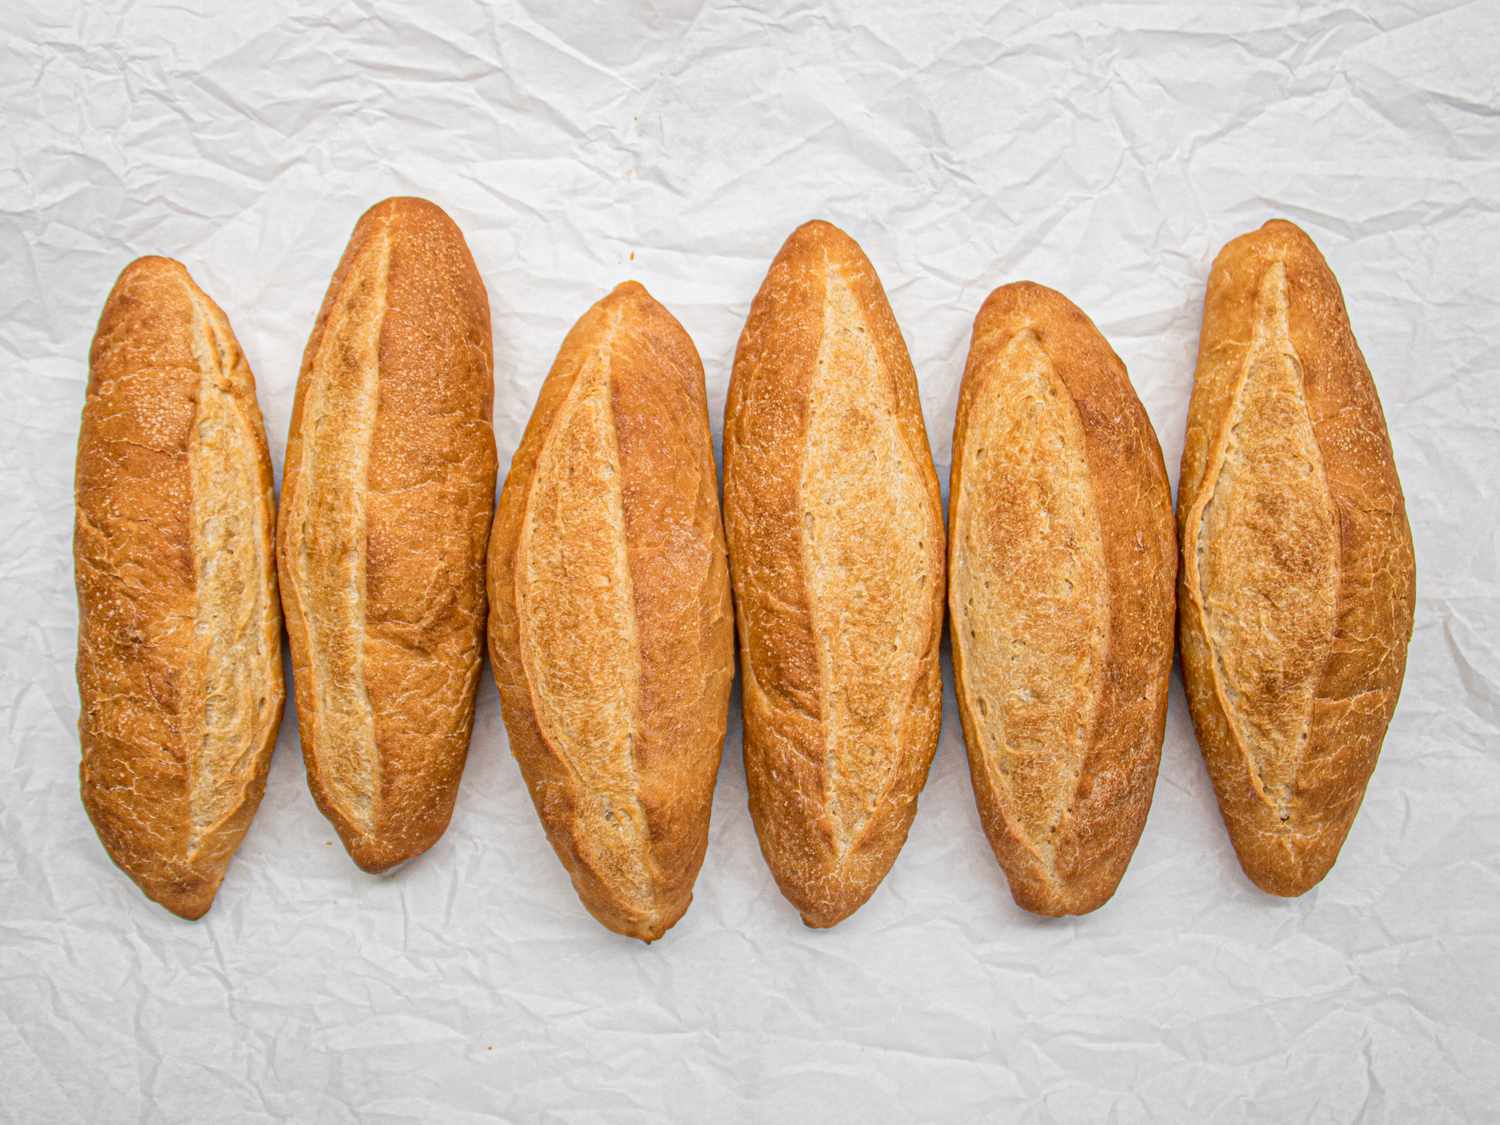 Six banh mi bread loaves in a line